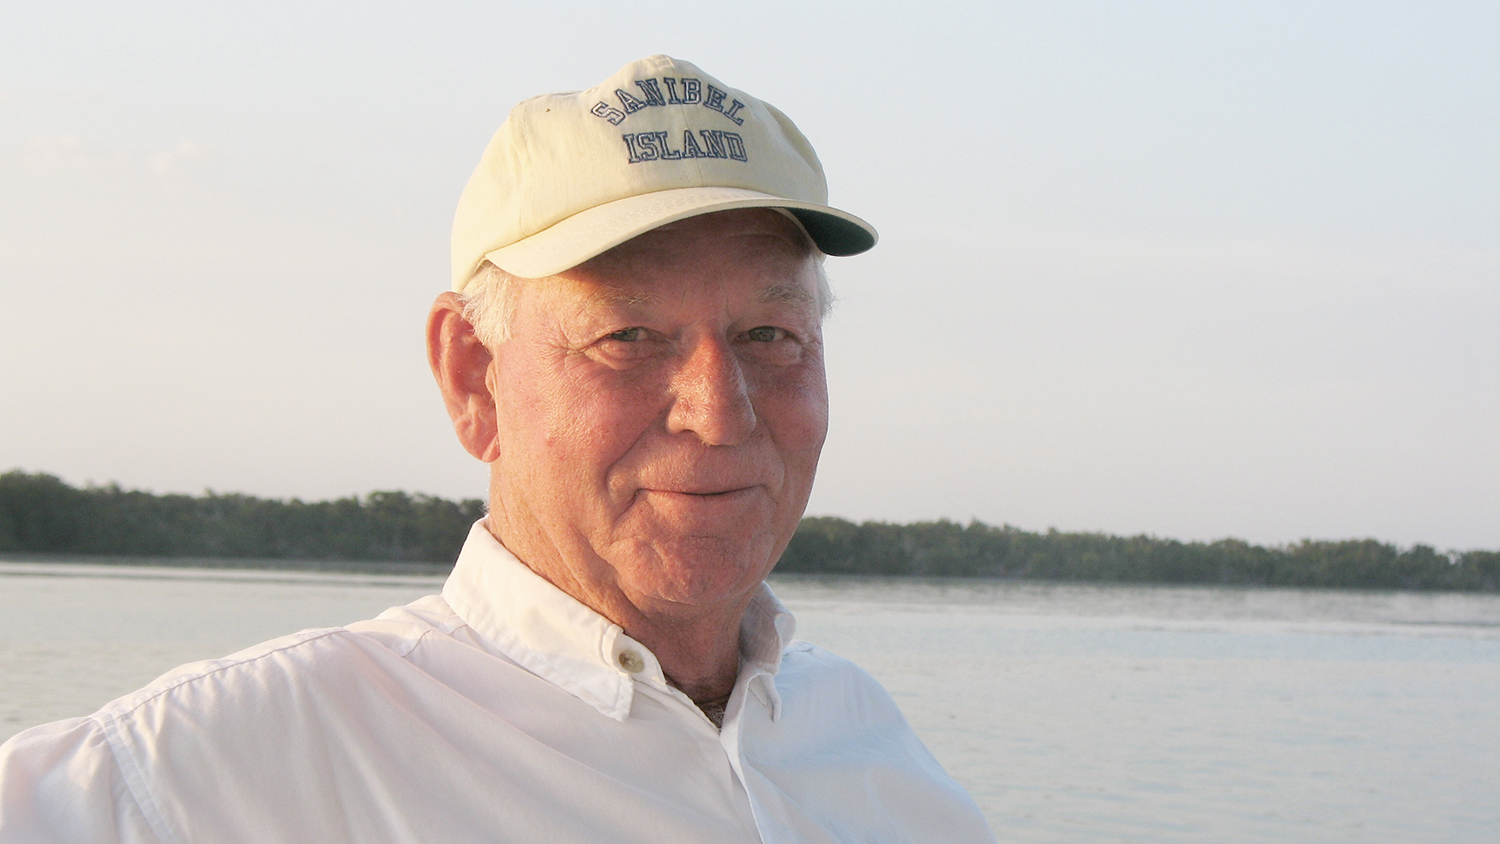 Jim Ellen in white shirt and baseball hat with a body of water behind him.